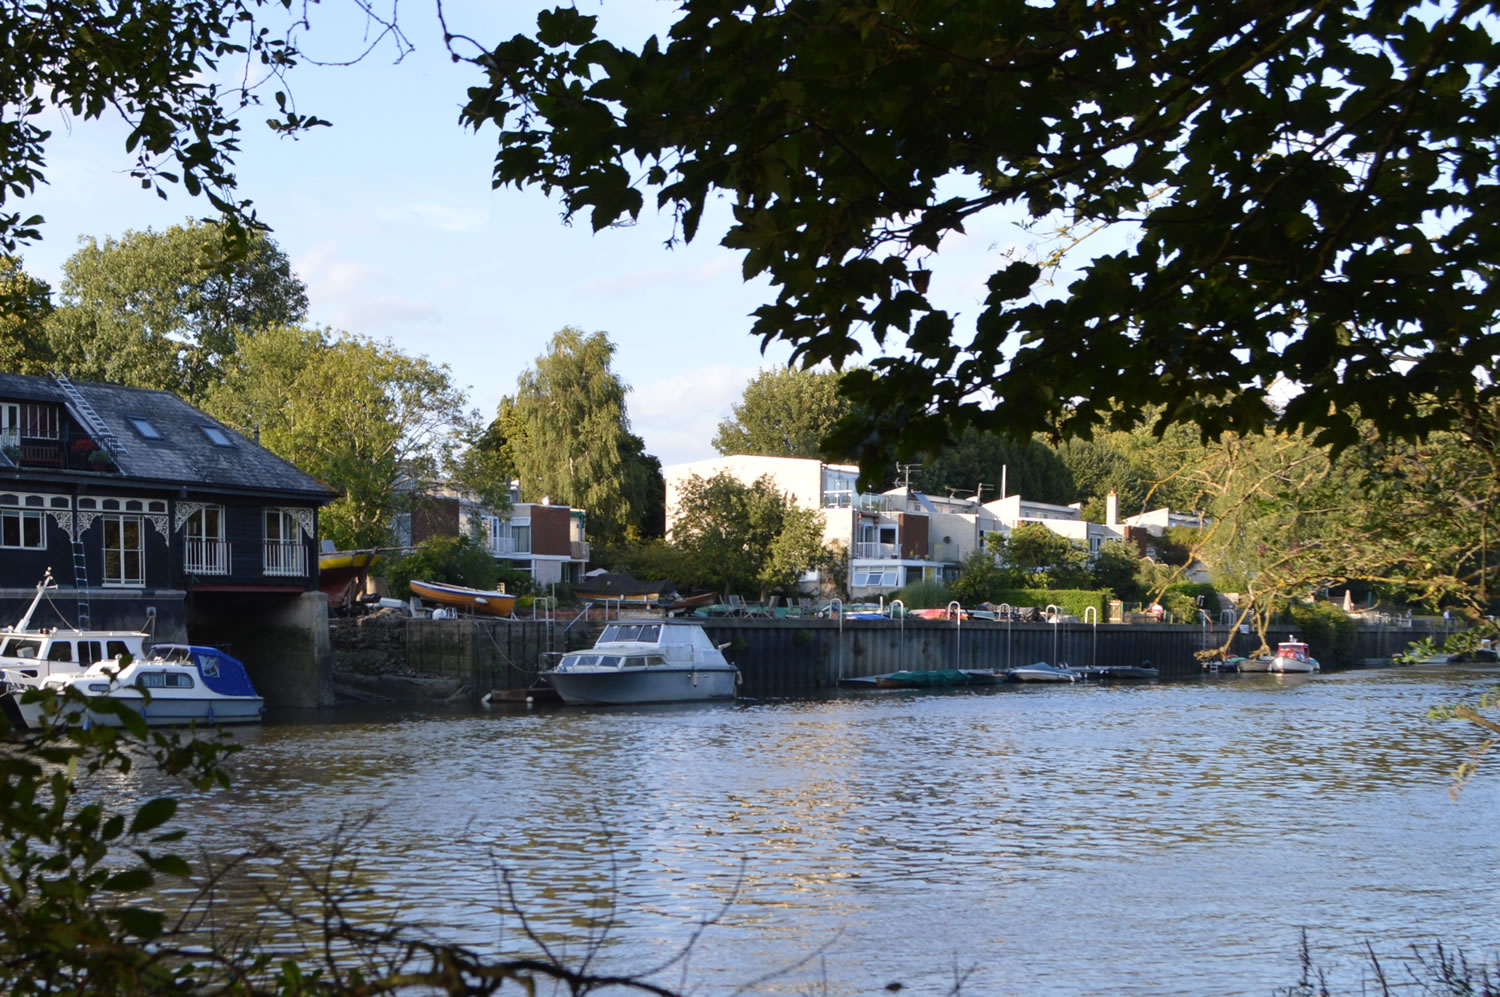 1970s houses built on the former site of Eel Pie Island Hotel photographed in 2019 (Nick Thorne)